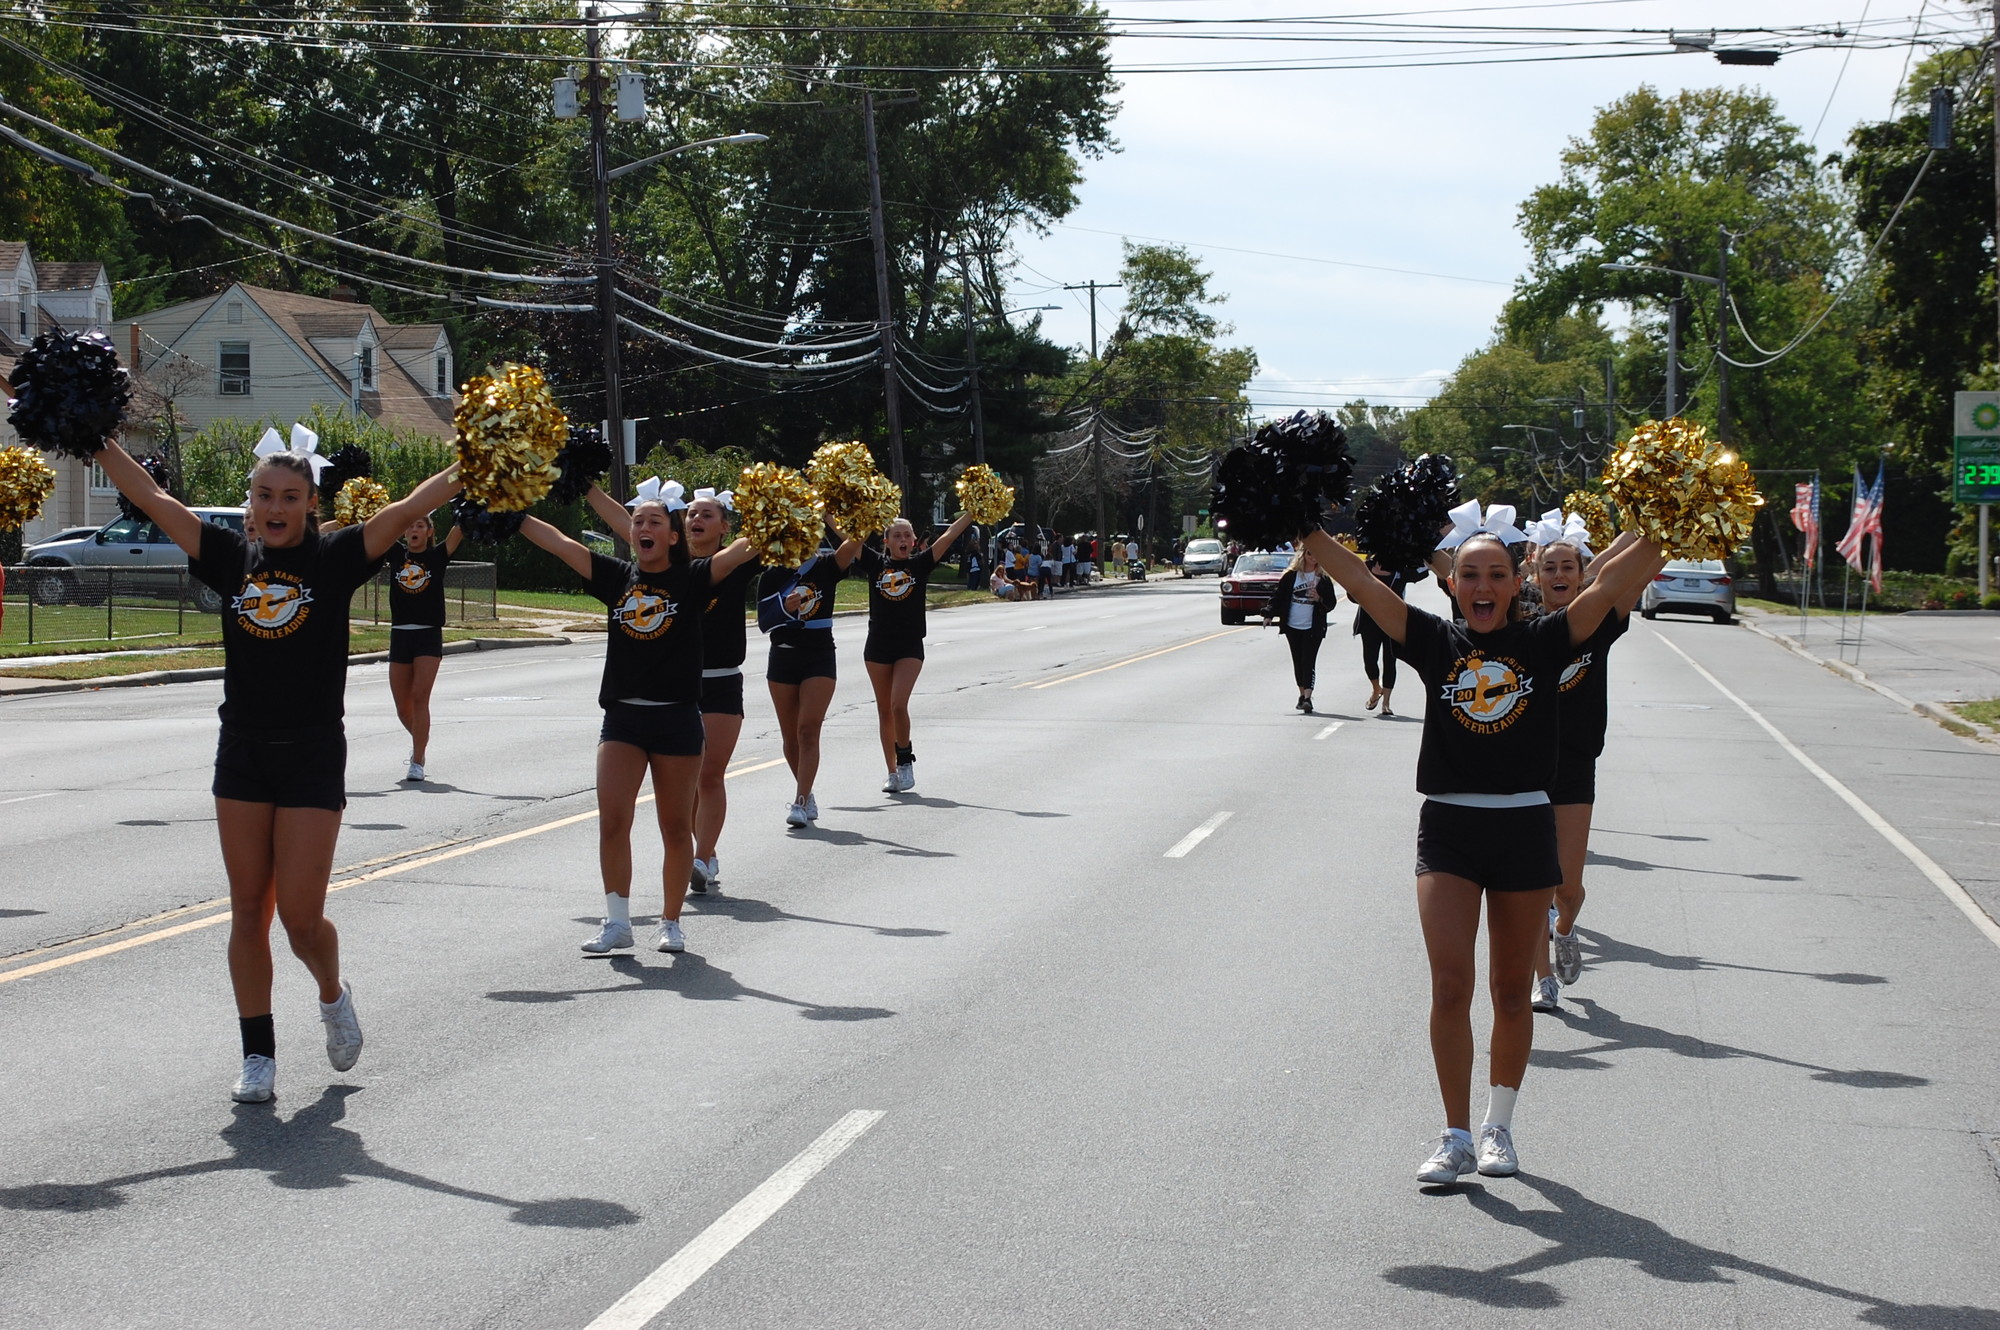 The Wantagh High School cheerleaders energized the crowd along the parade route.